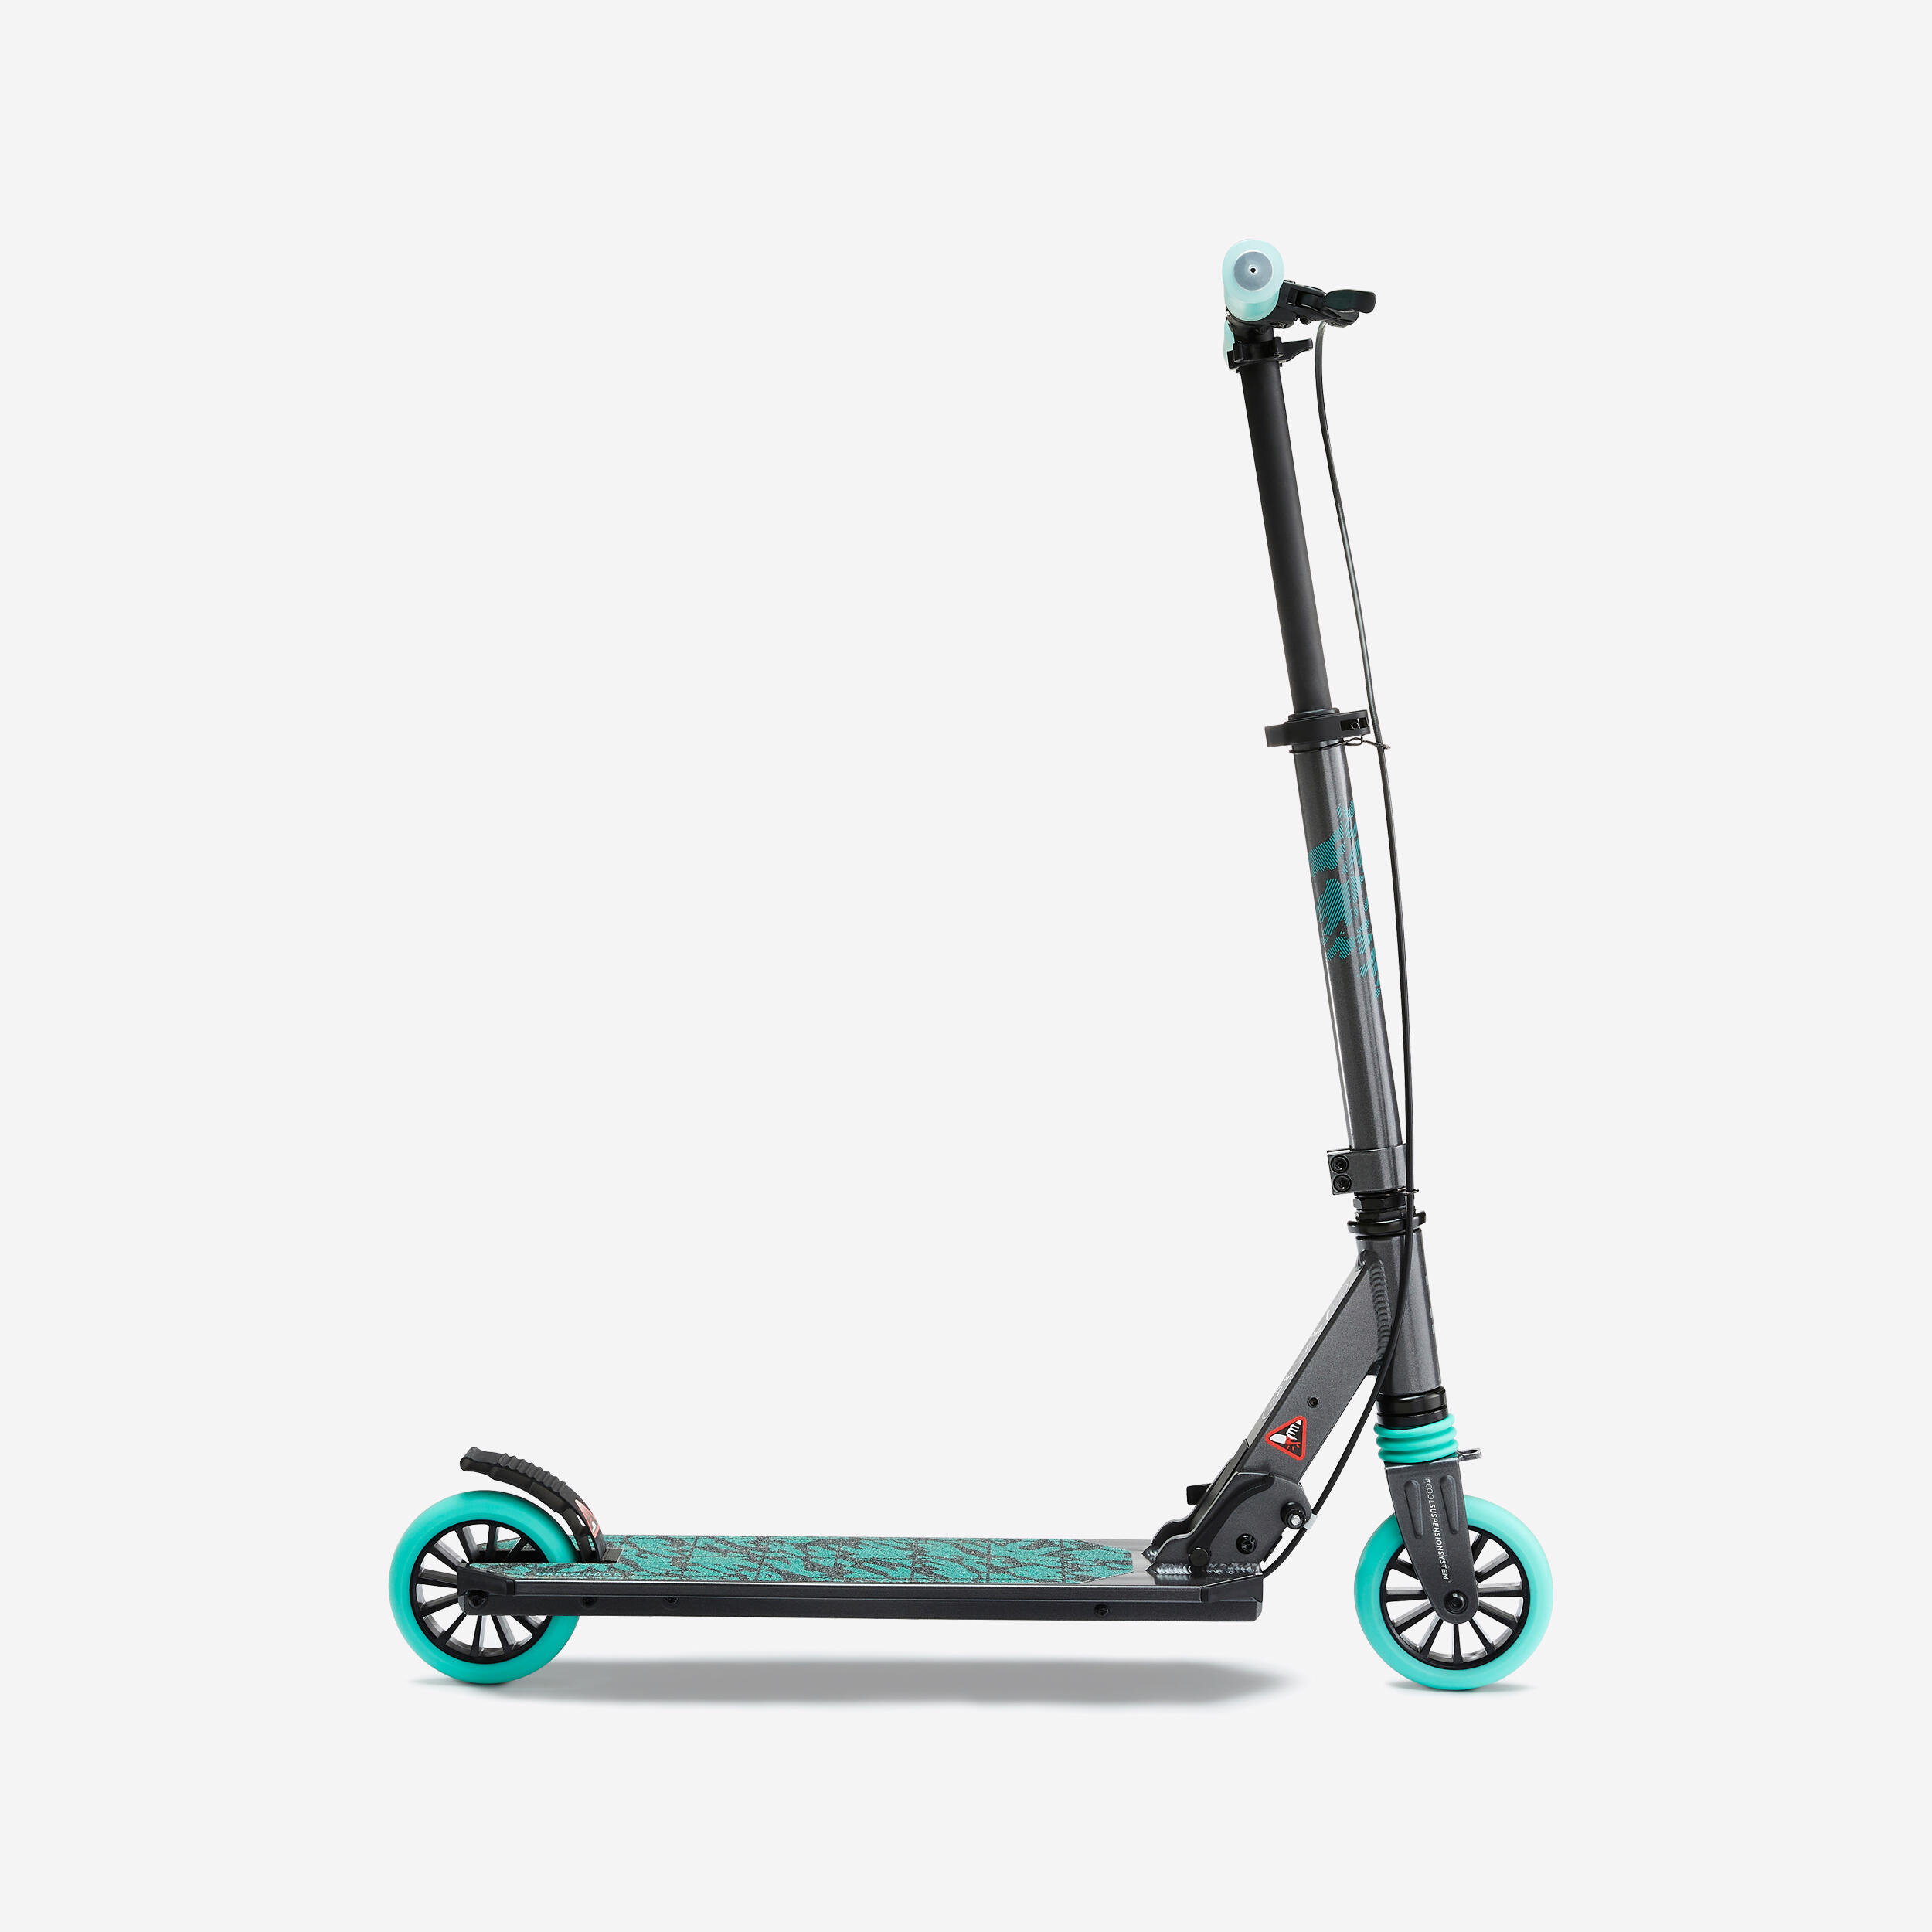 Kids' Scooter with Handlebar Brake and Suspension Mid 5 - Grey/Green 11/11